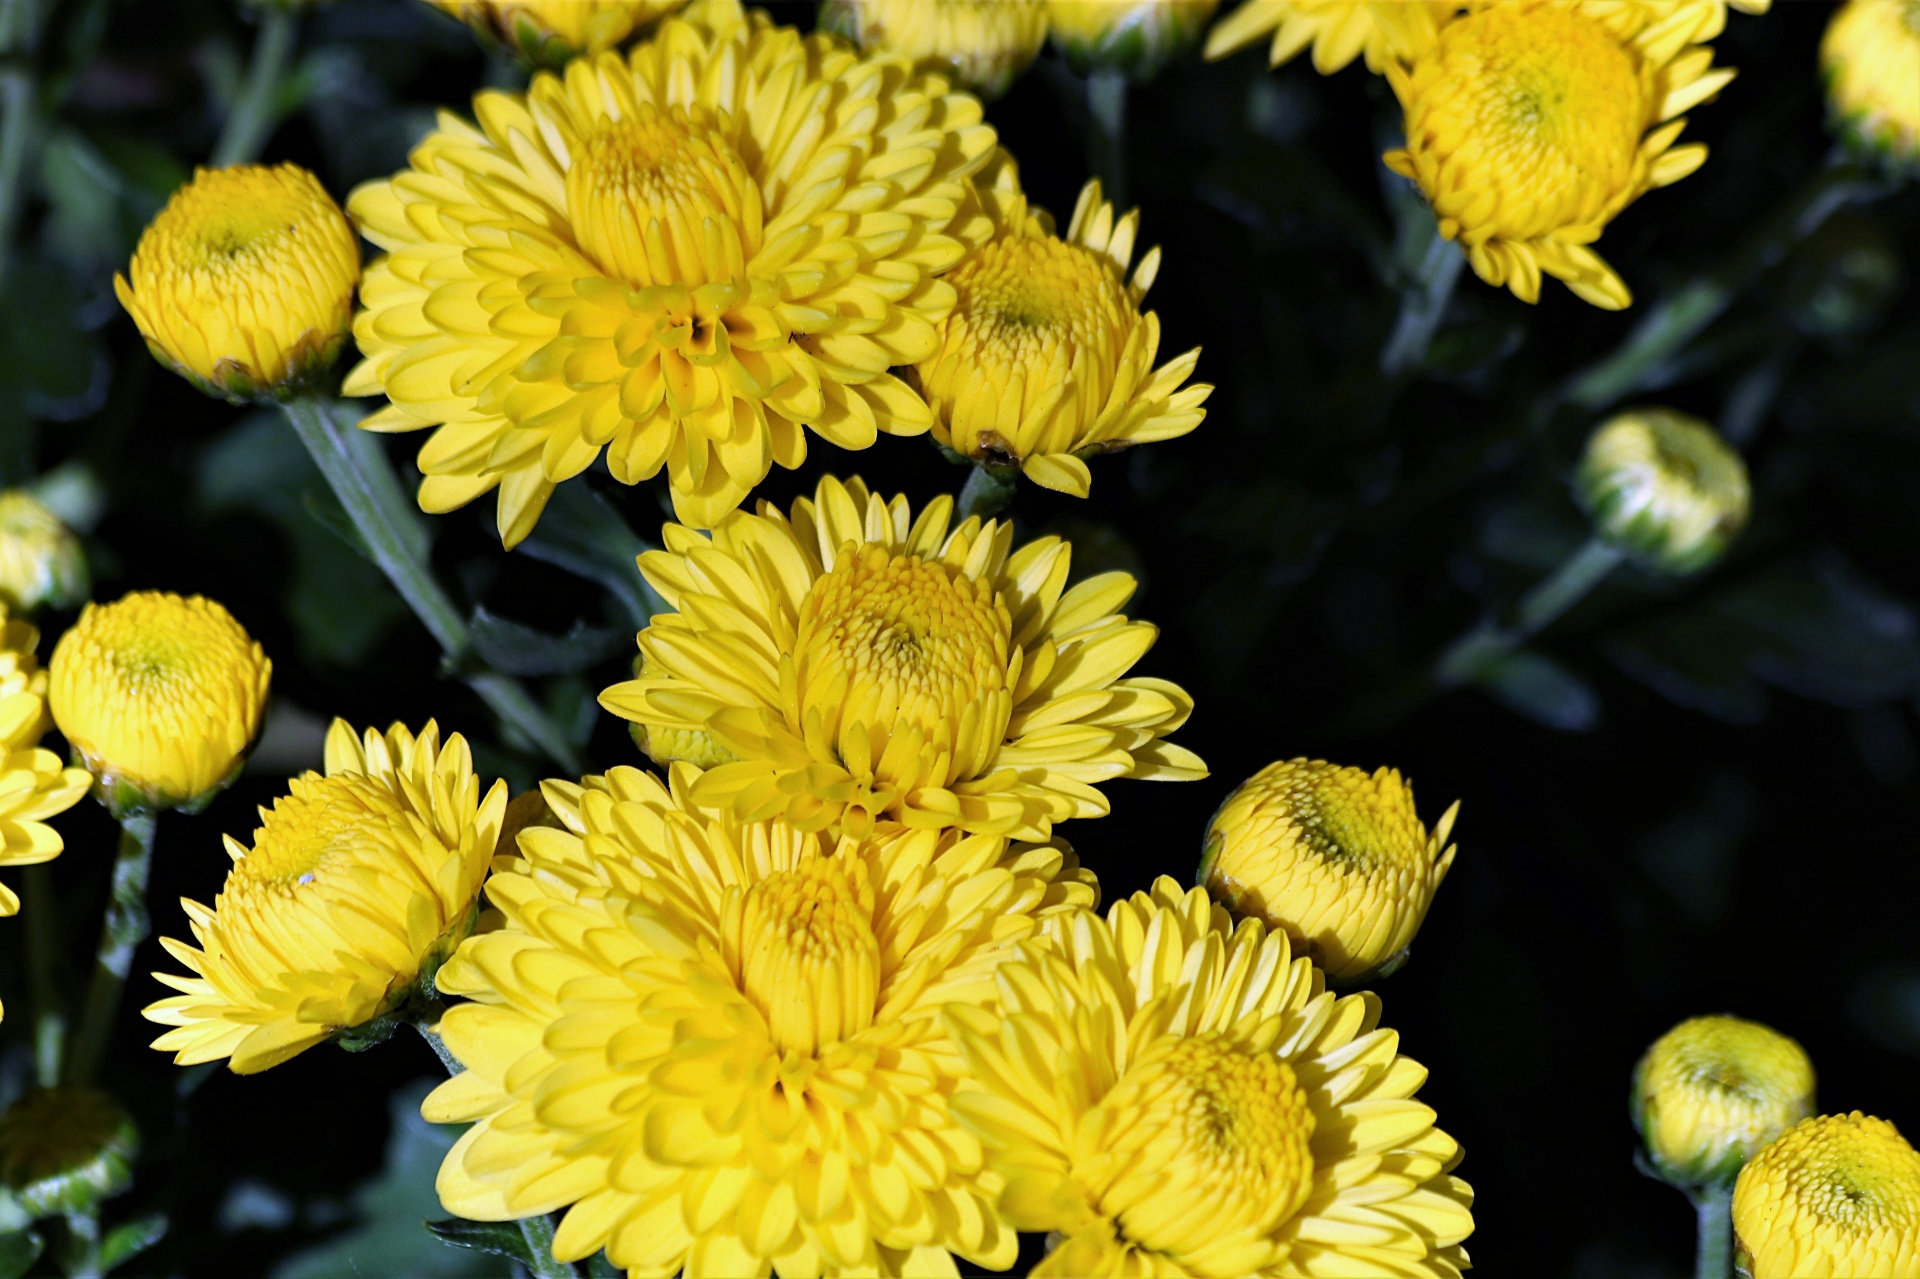 Close-up of bright yellow chrysanthemum flowers and buds on a dark background.